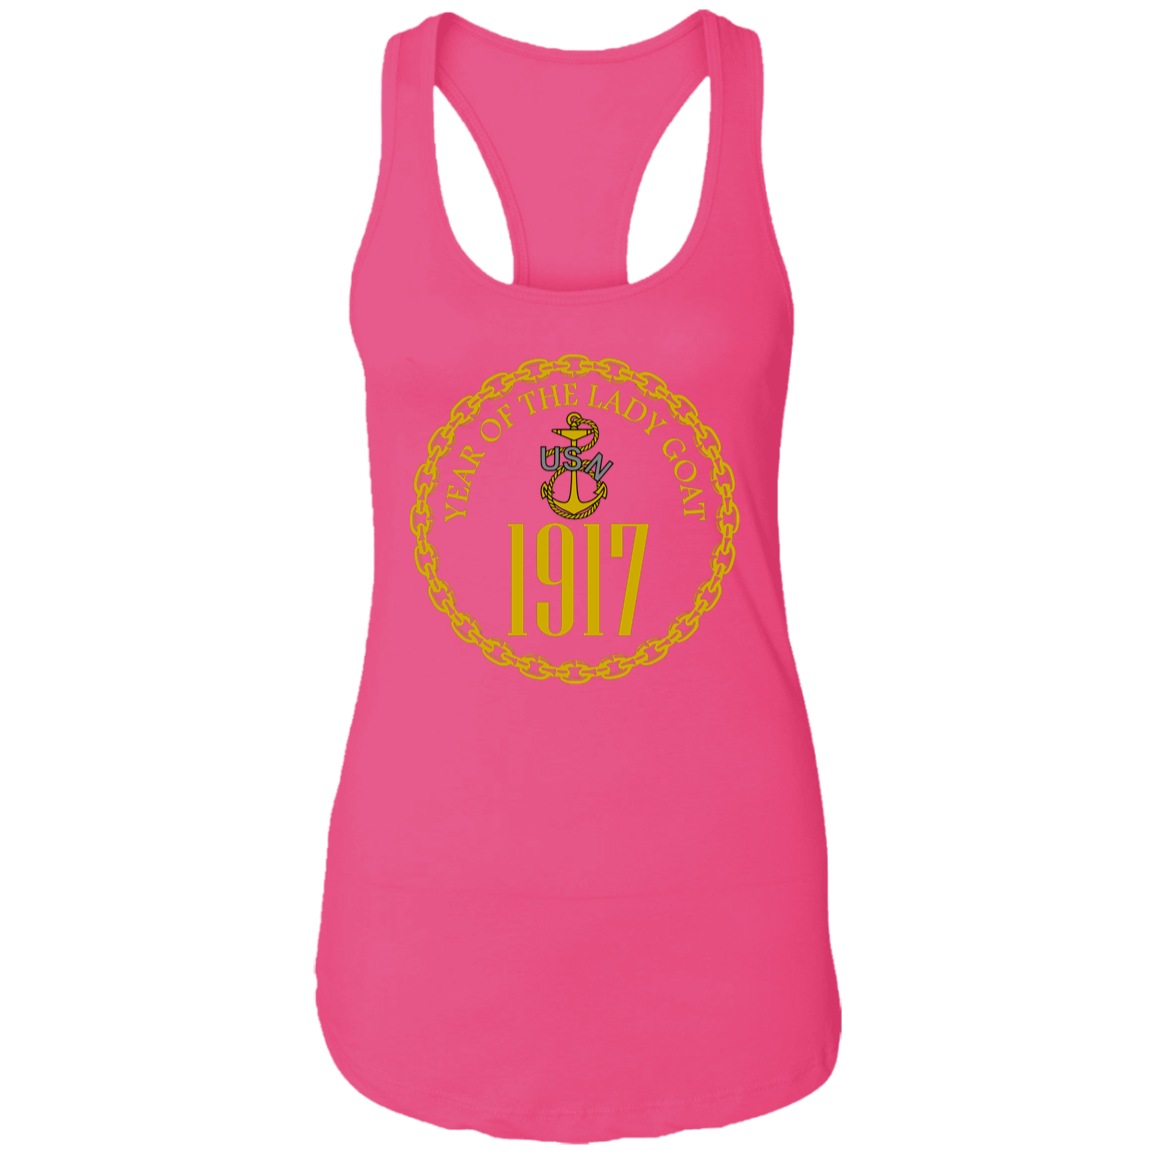 Year of the Lady Goat Gold Ladies Racerback Tank